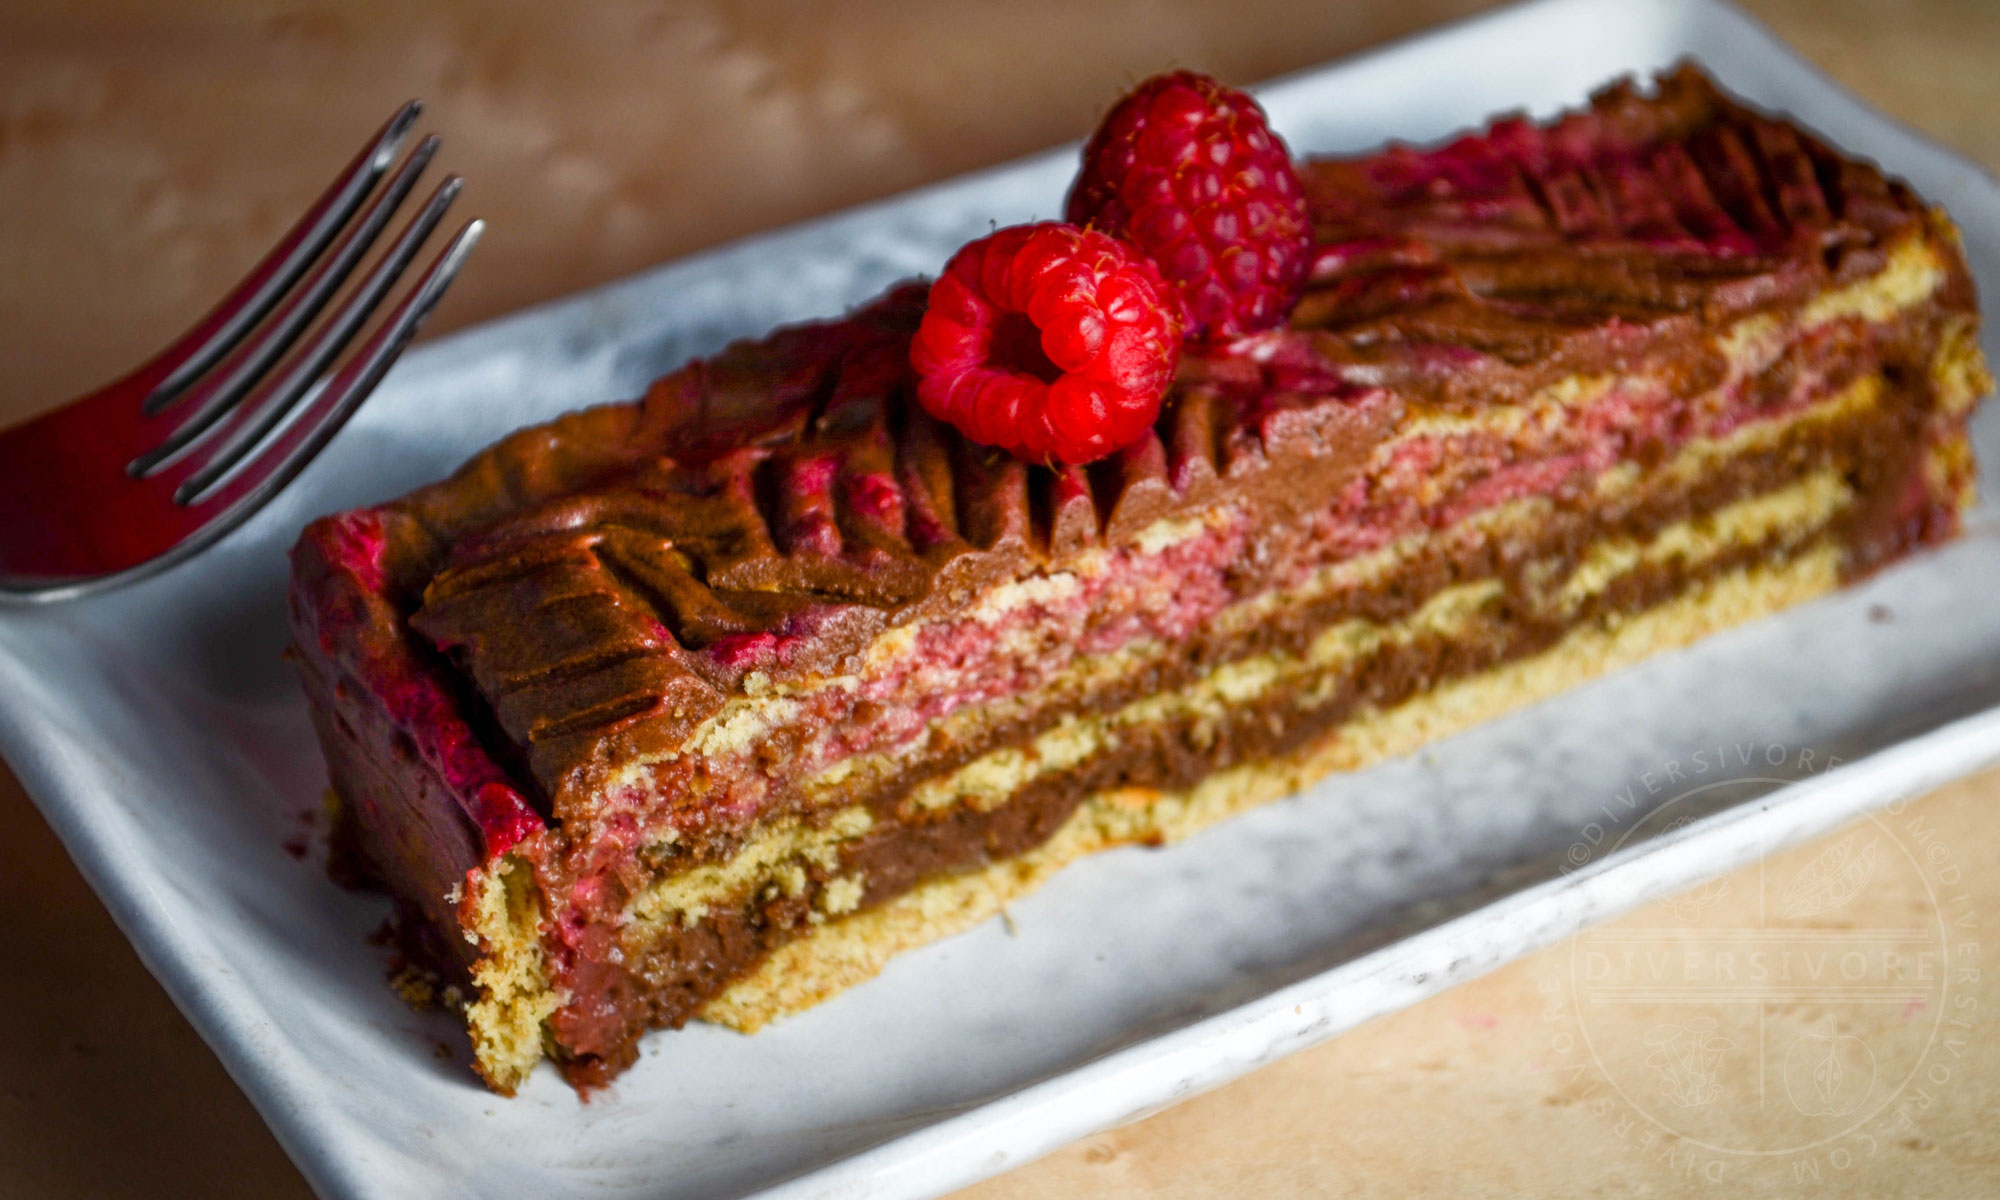 Chocolate Raspberry Rose Icebox Cake slice topped with two raspberries and served on a rectangular plate